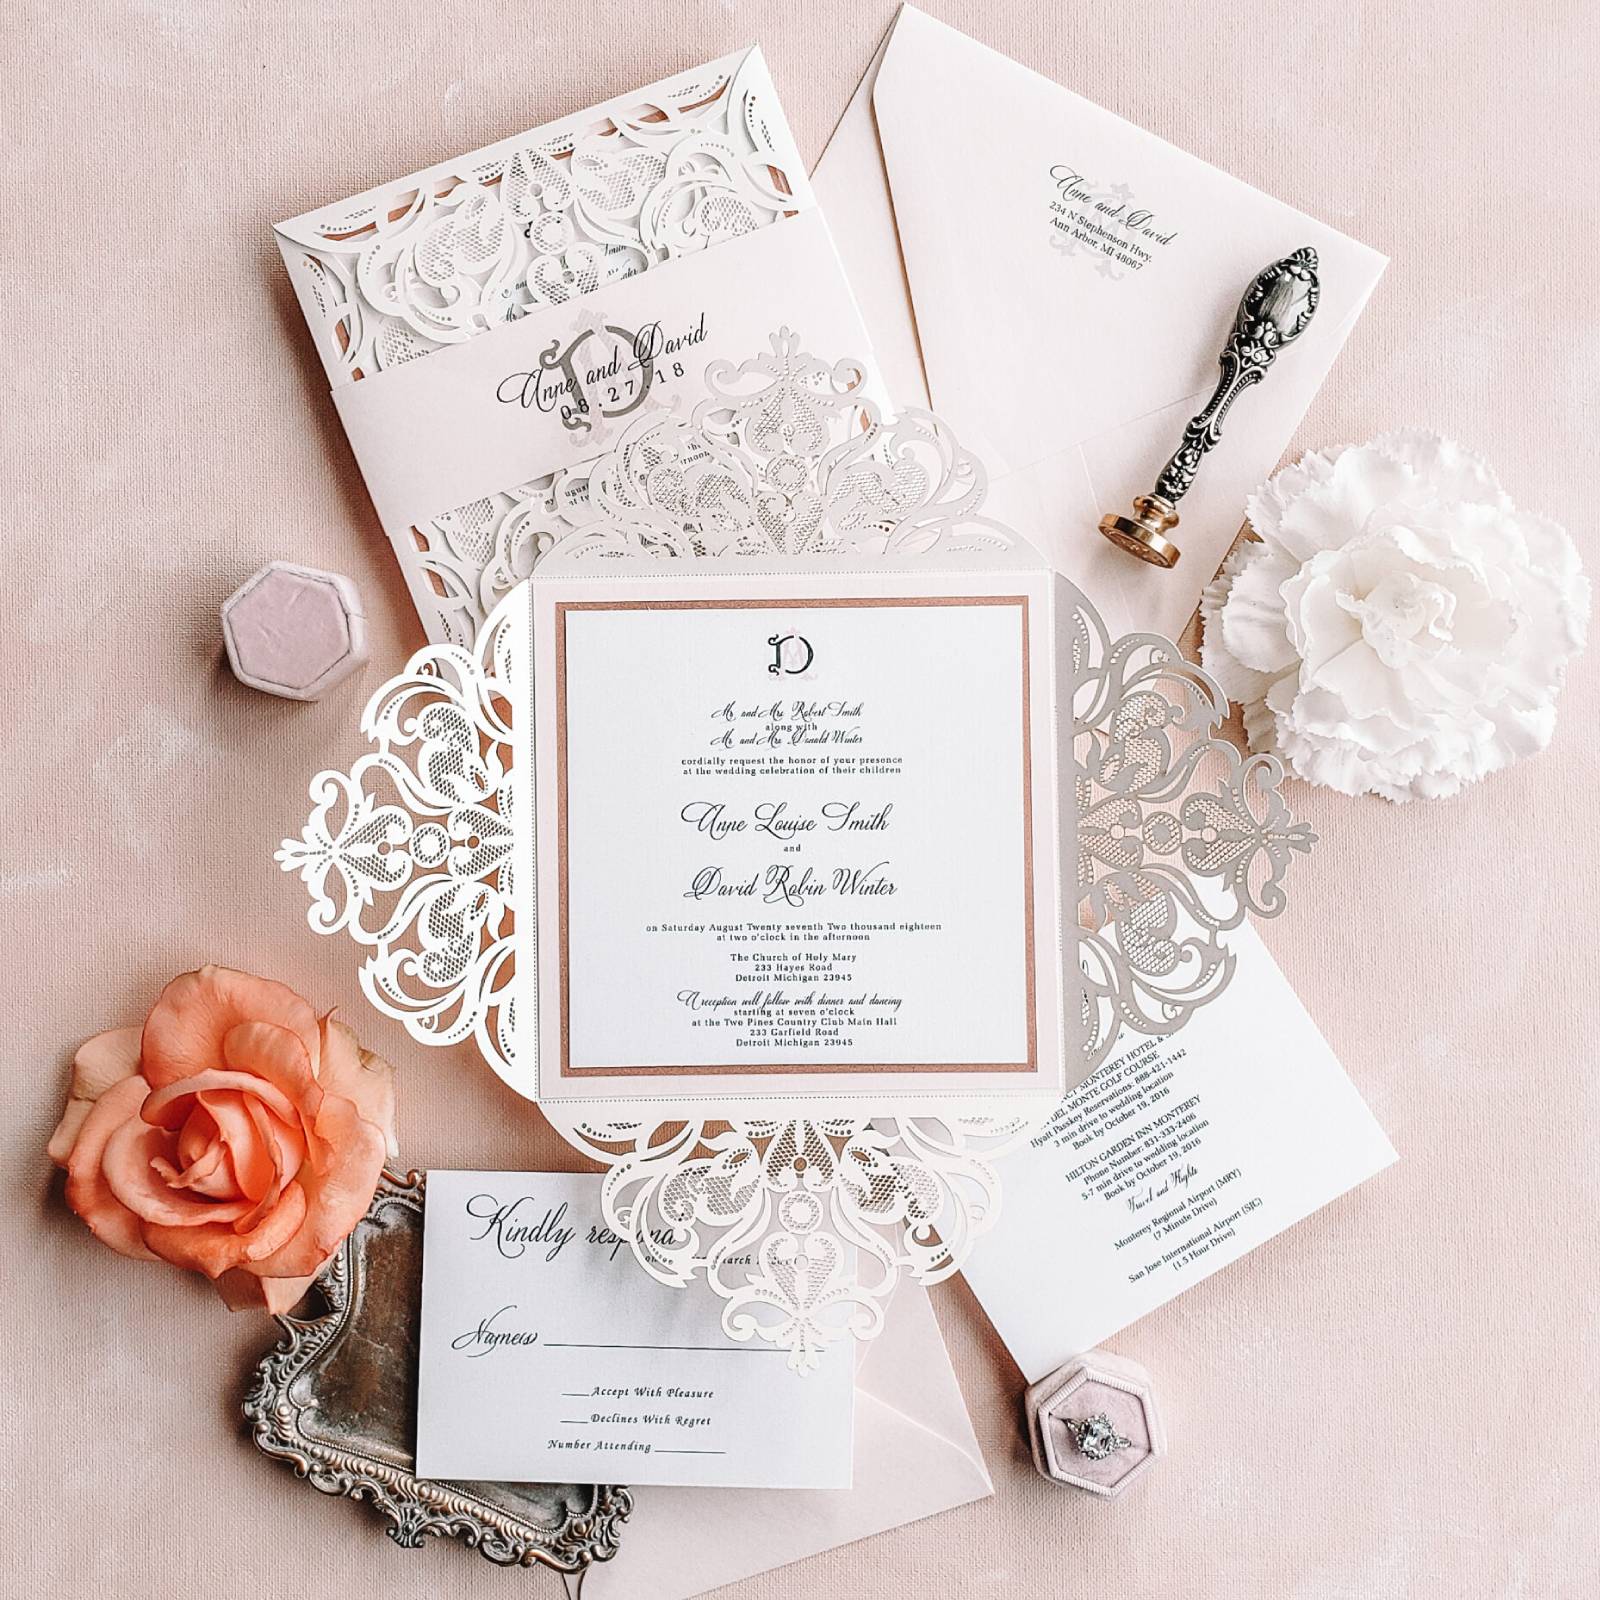 [vc_row][vc_column][vc_column_text]Purchase this listing to get a sample of our Infinite wedding invitation suite.

The sample includes:

• 6